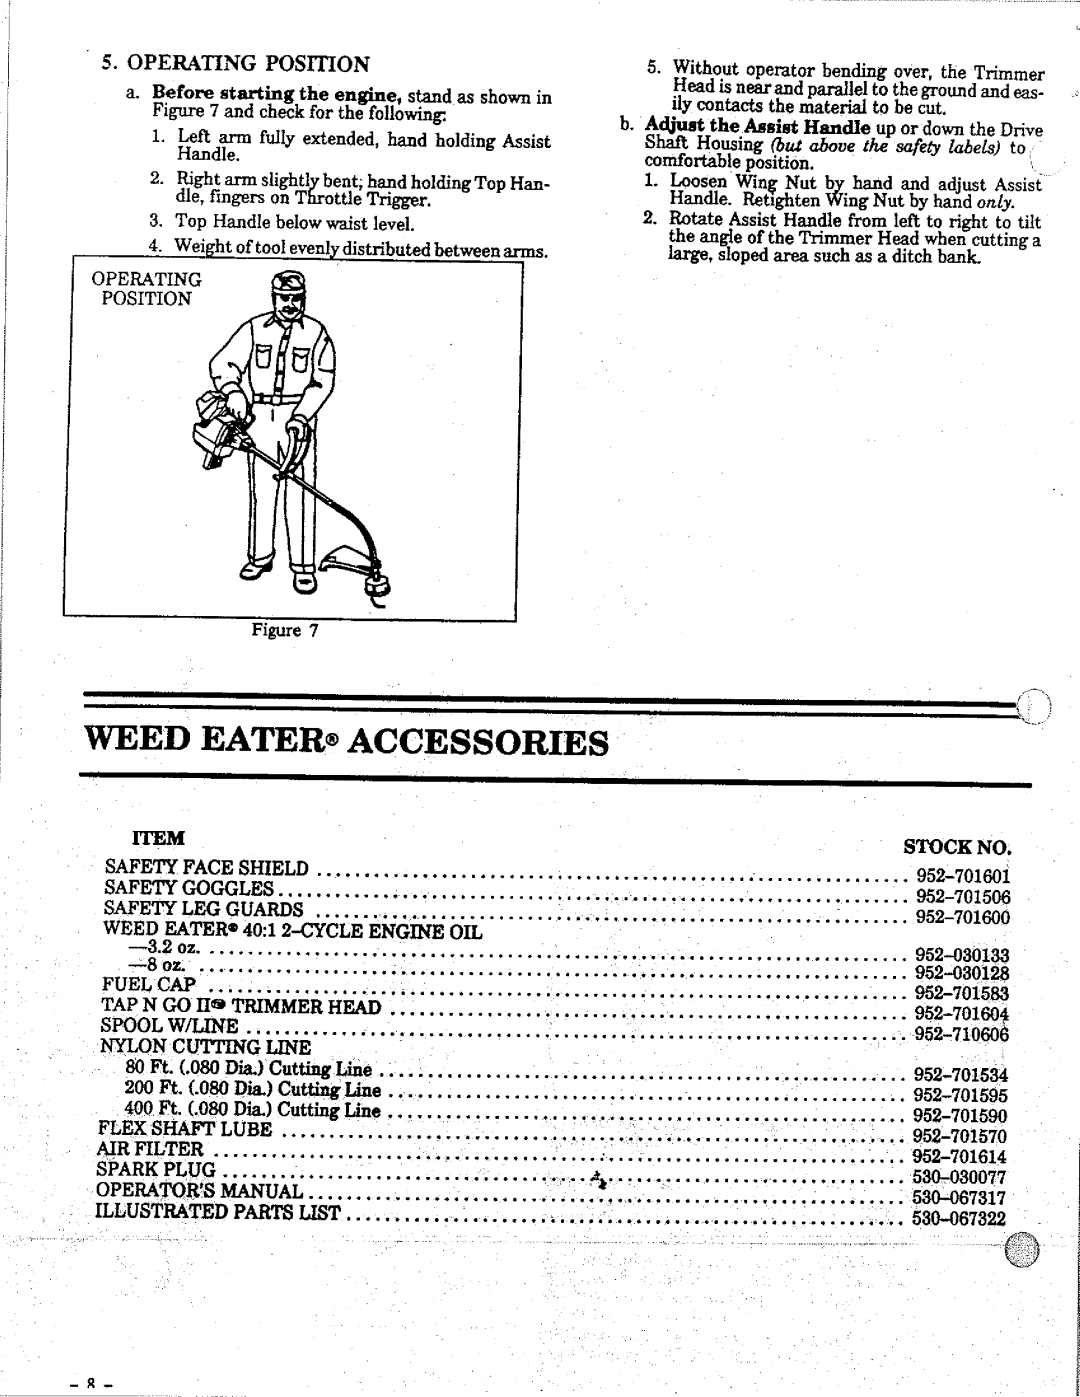 Weed Eater 17 manual 